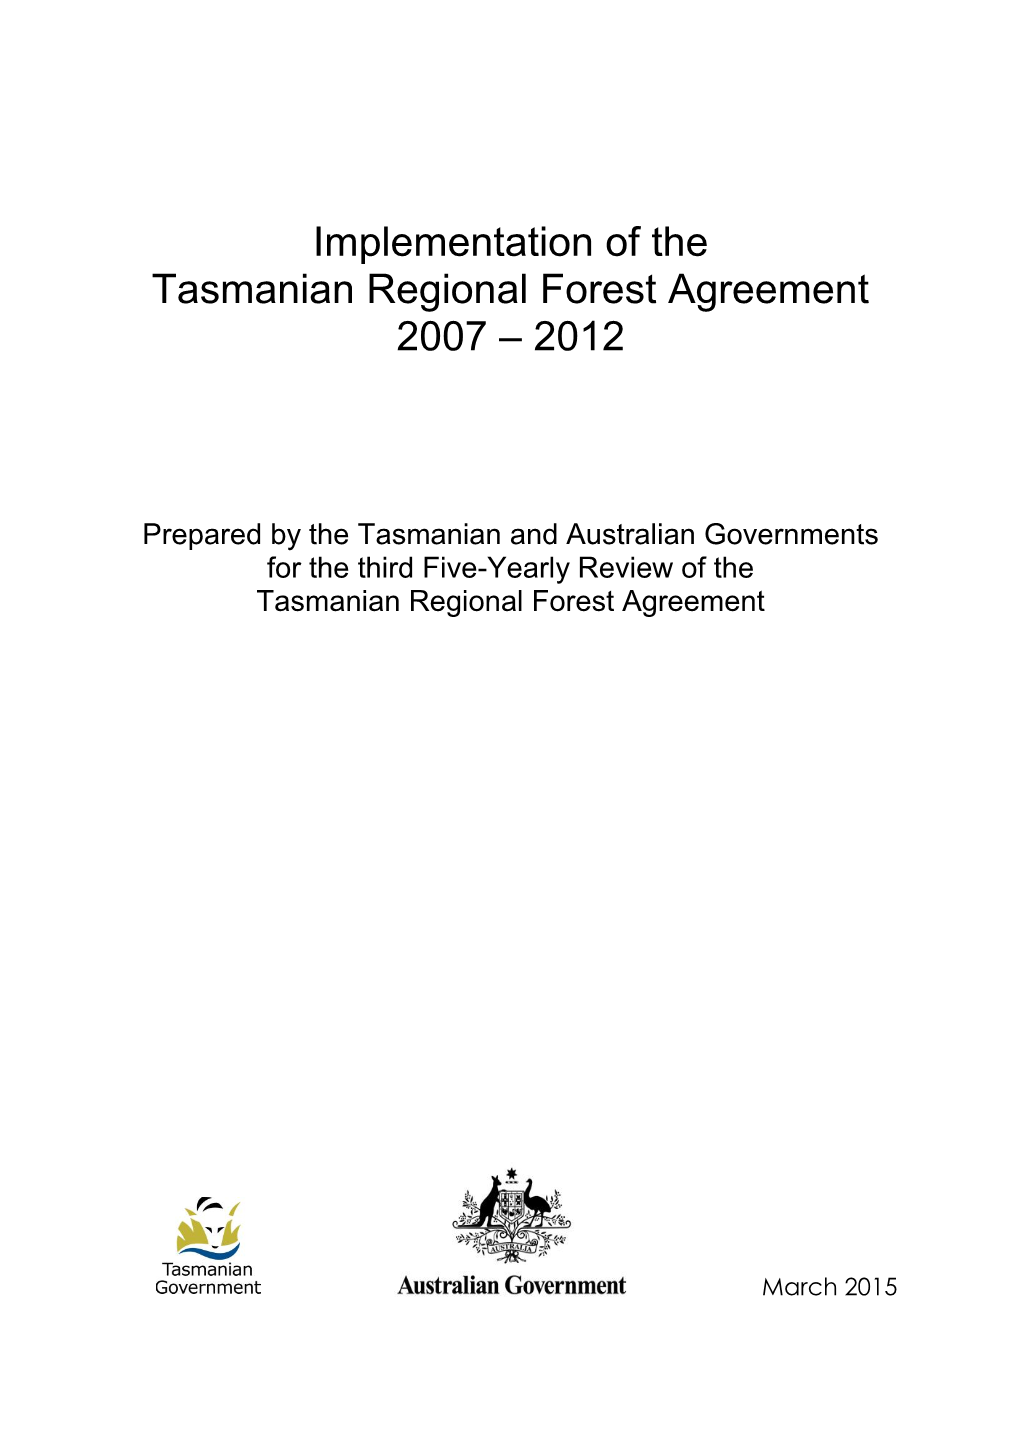 Implementation of the Tasmanian Regional Forest Agreement 2007 – 2012